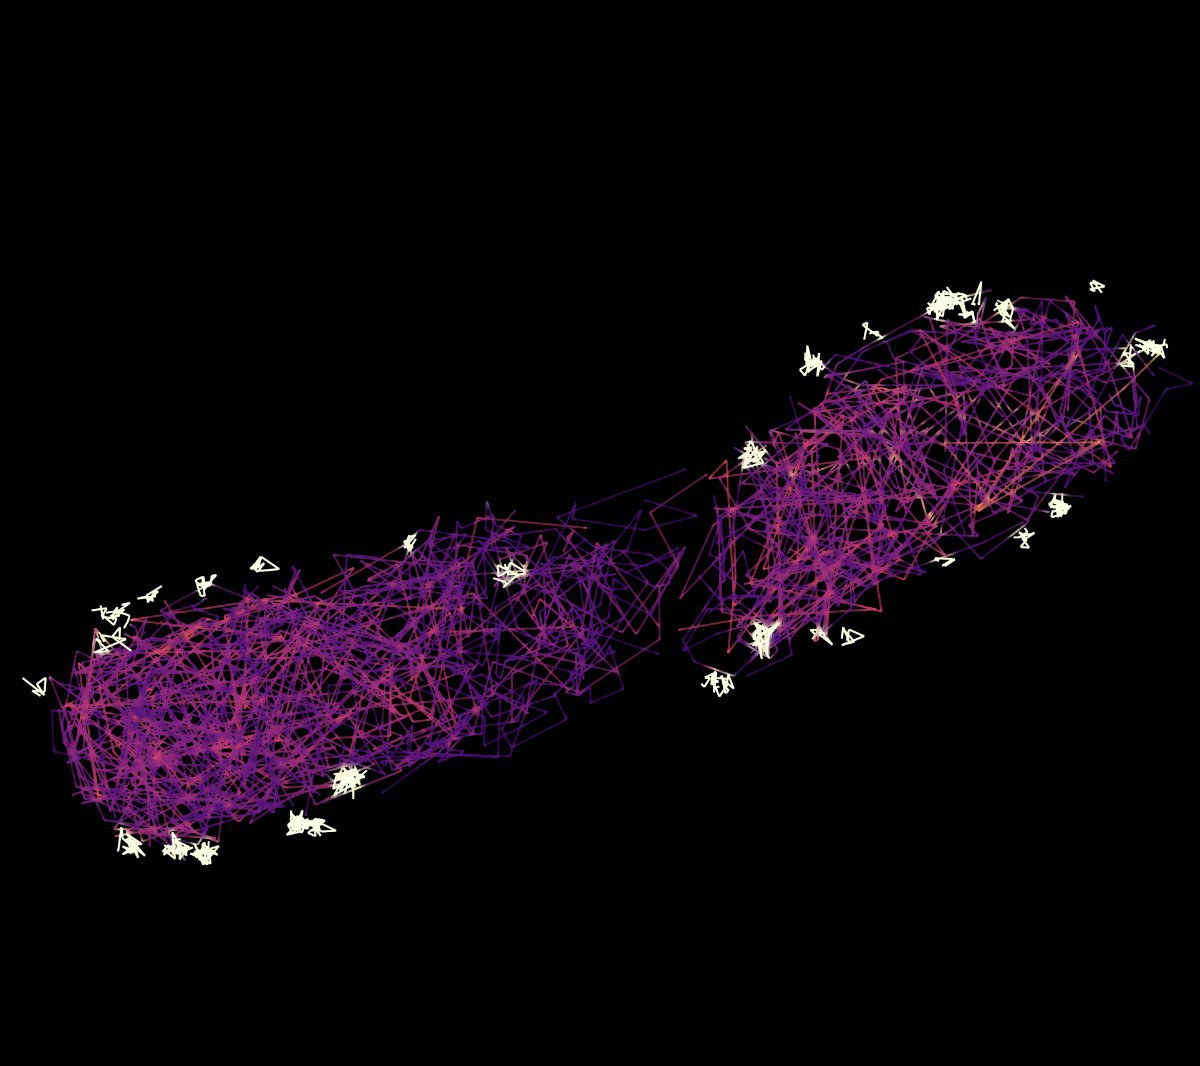 How Bacteria load their syringes